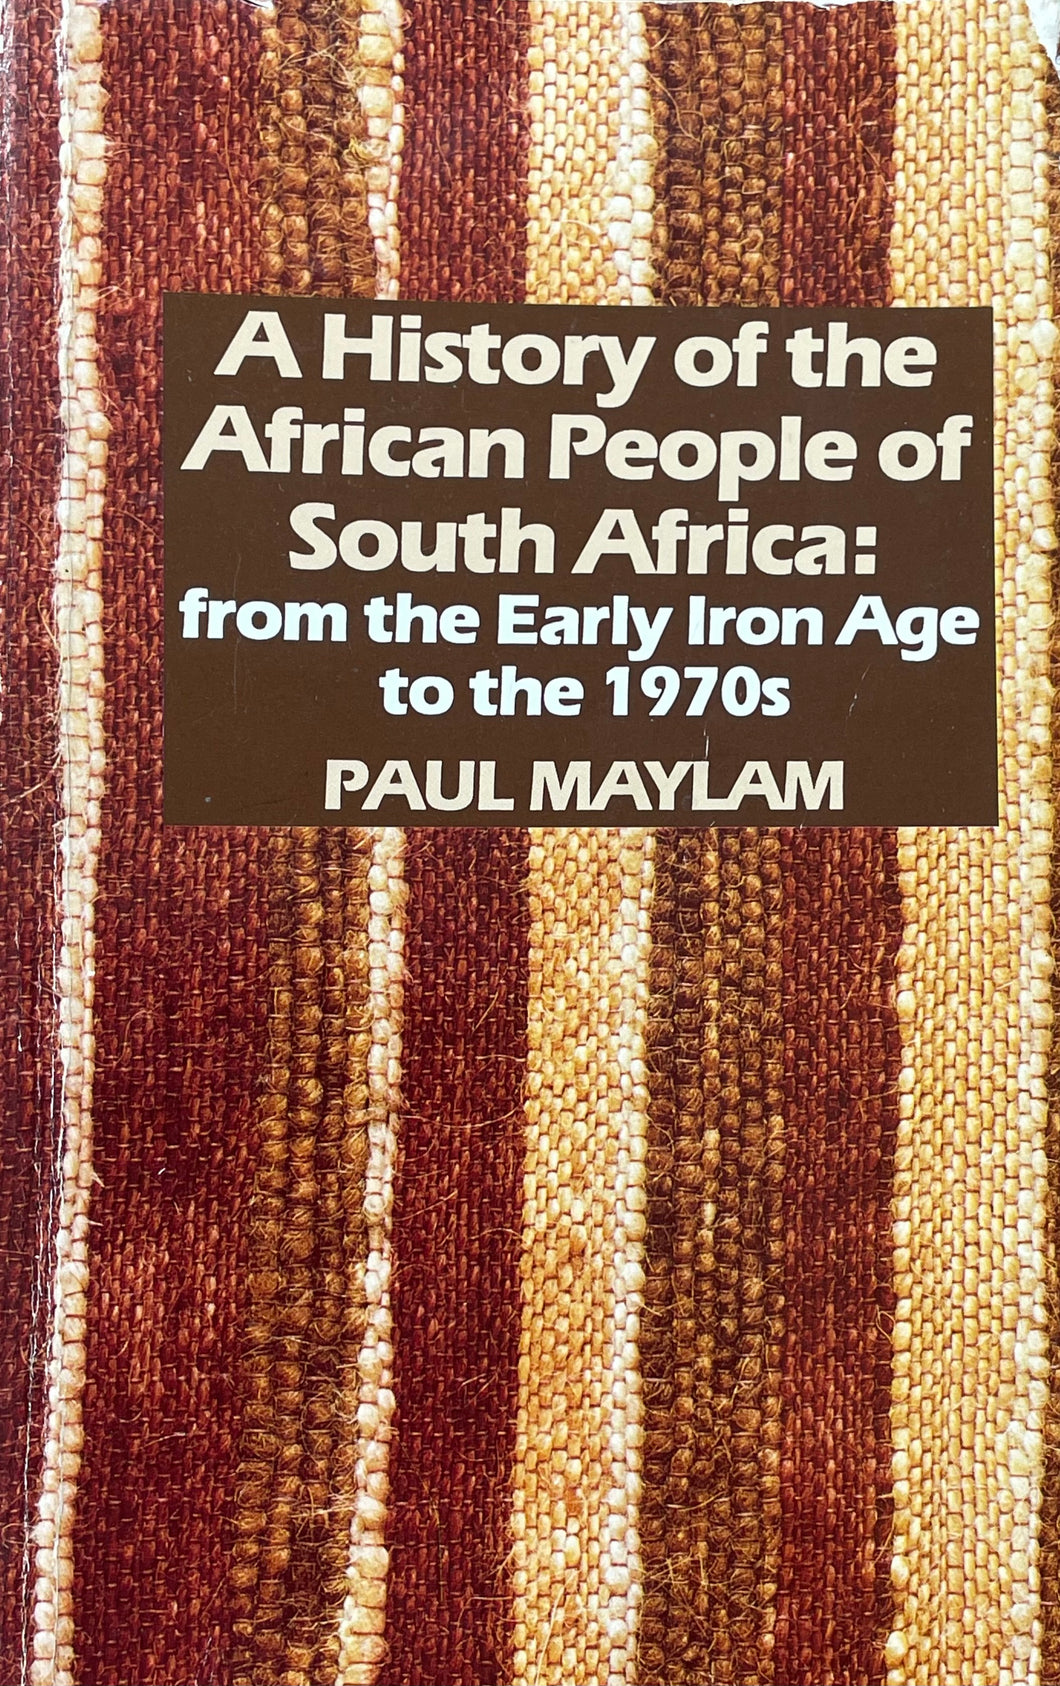 The History of the African People of South Africa: From the Early Iron Age to the 1970's By Paul Maylam, Softcover